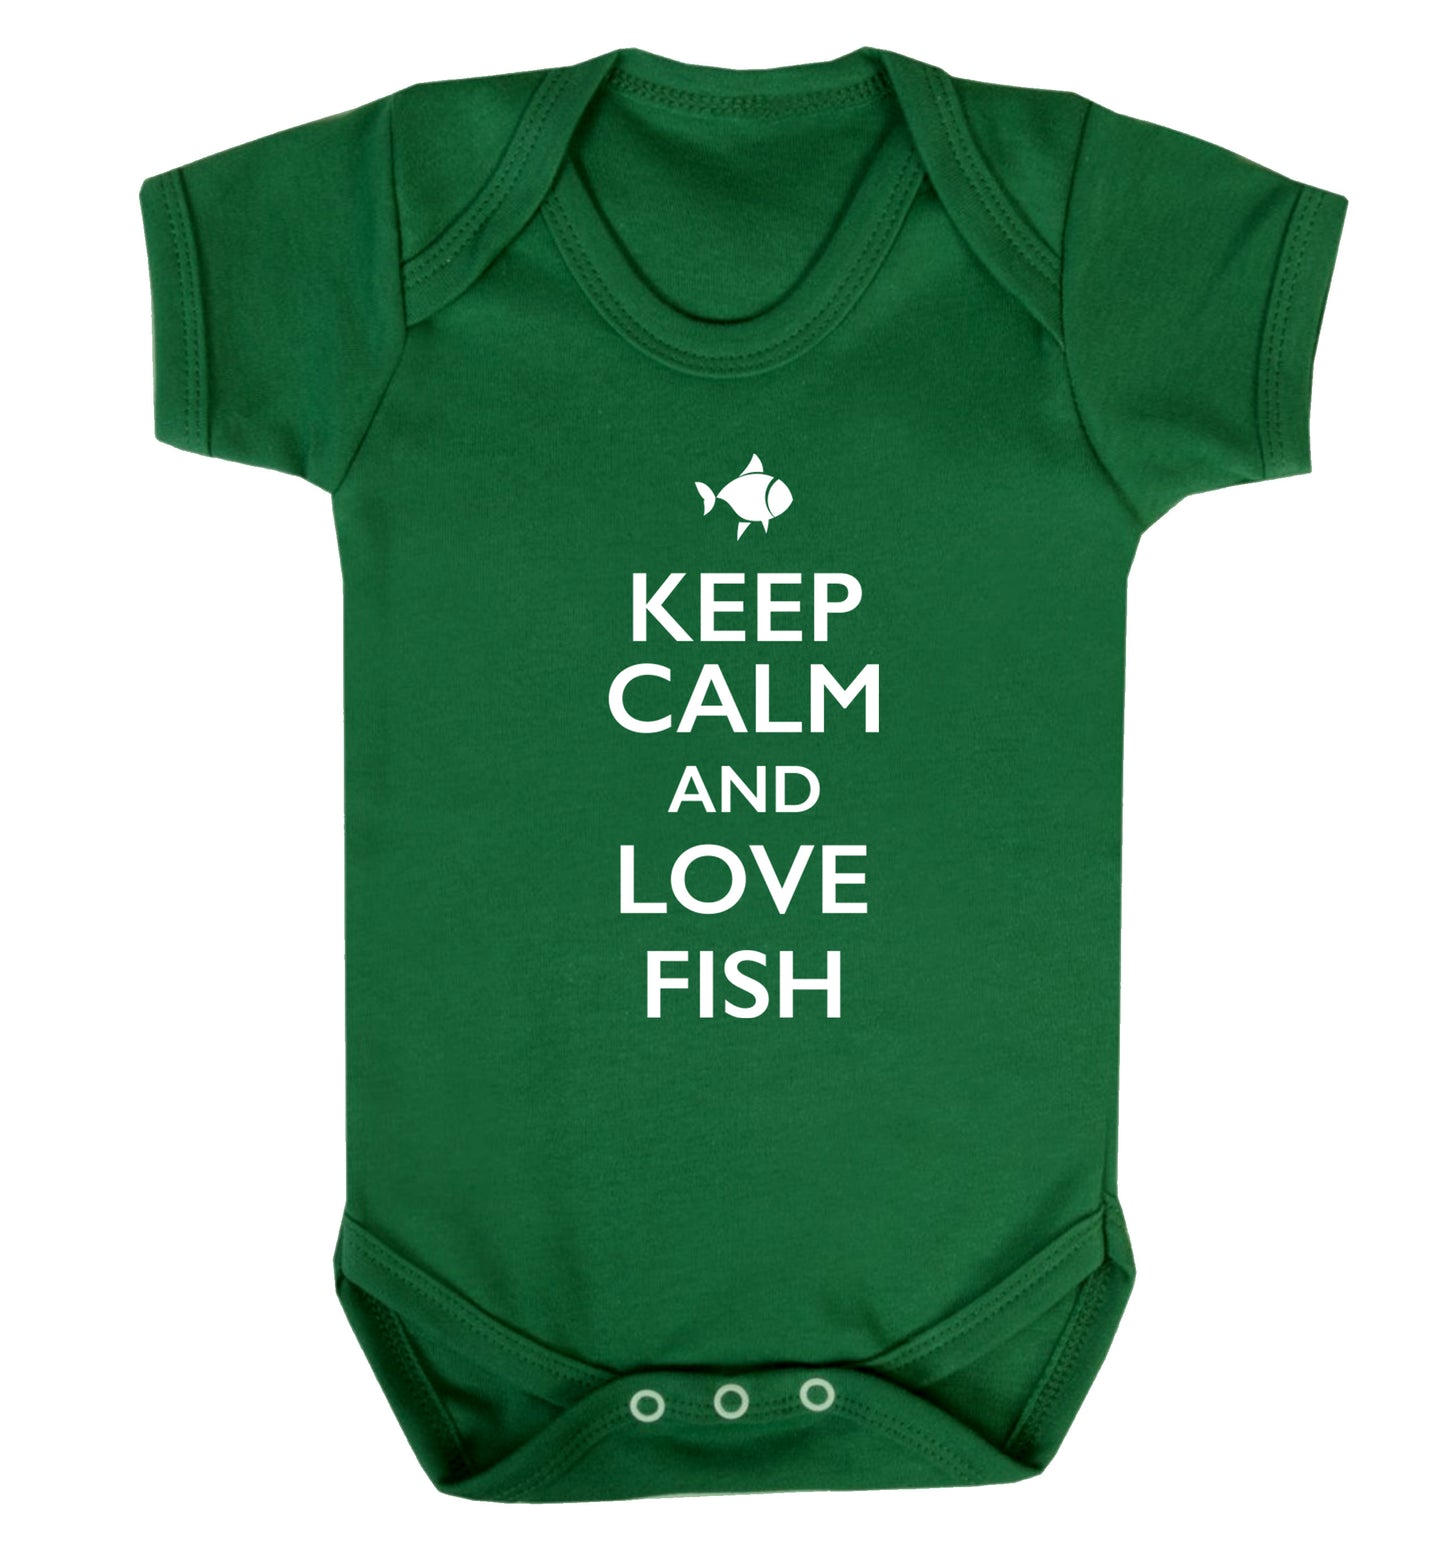 Keep calm and love fish Baby Vest green 18-24 months